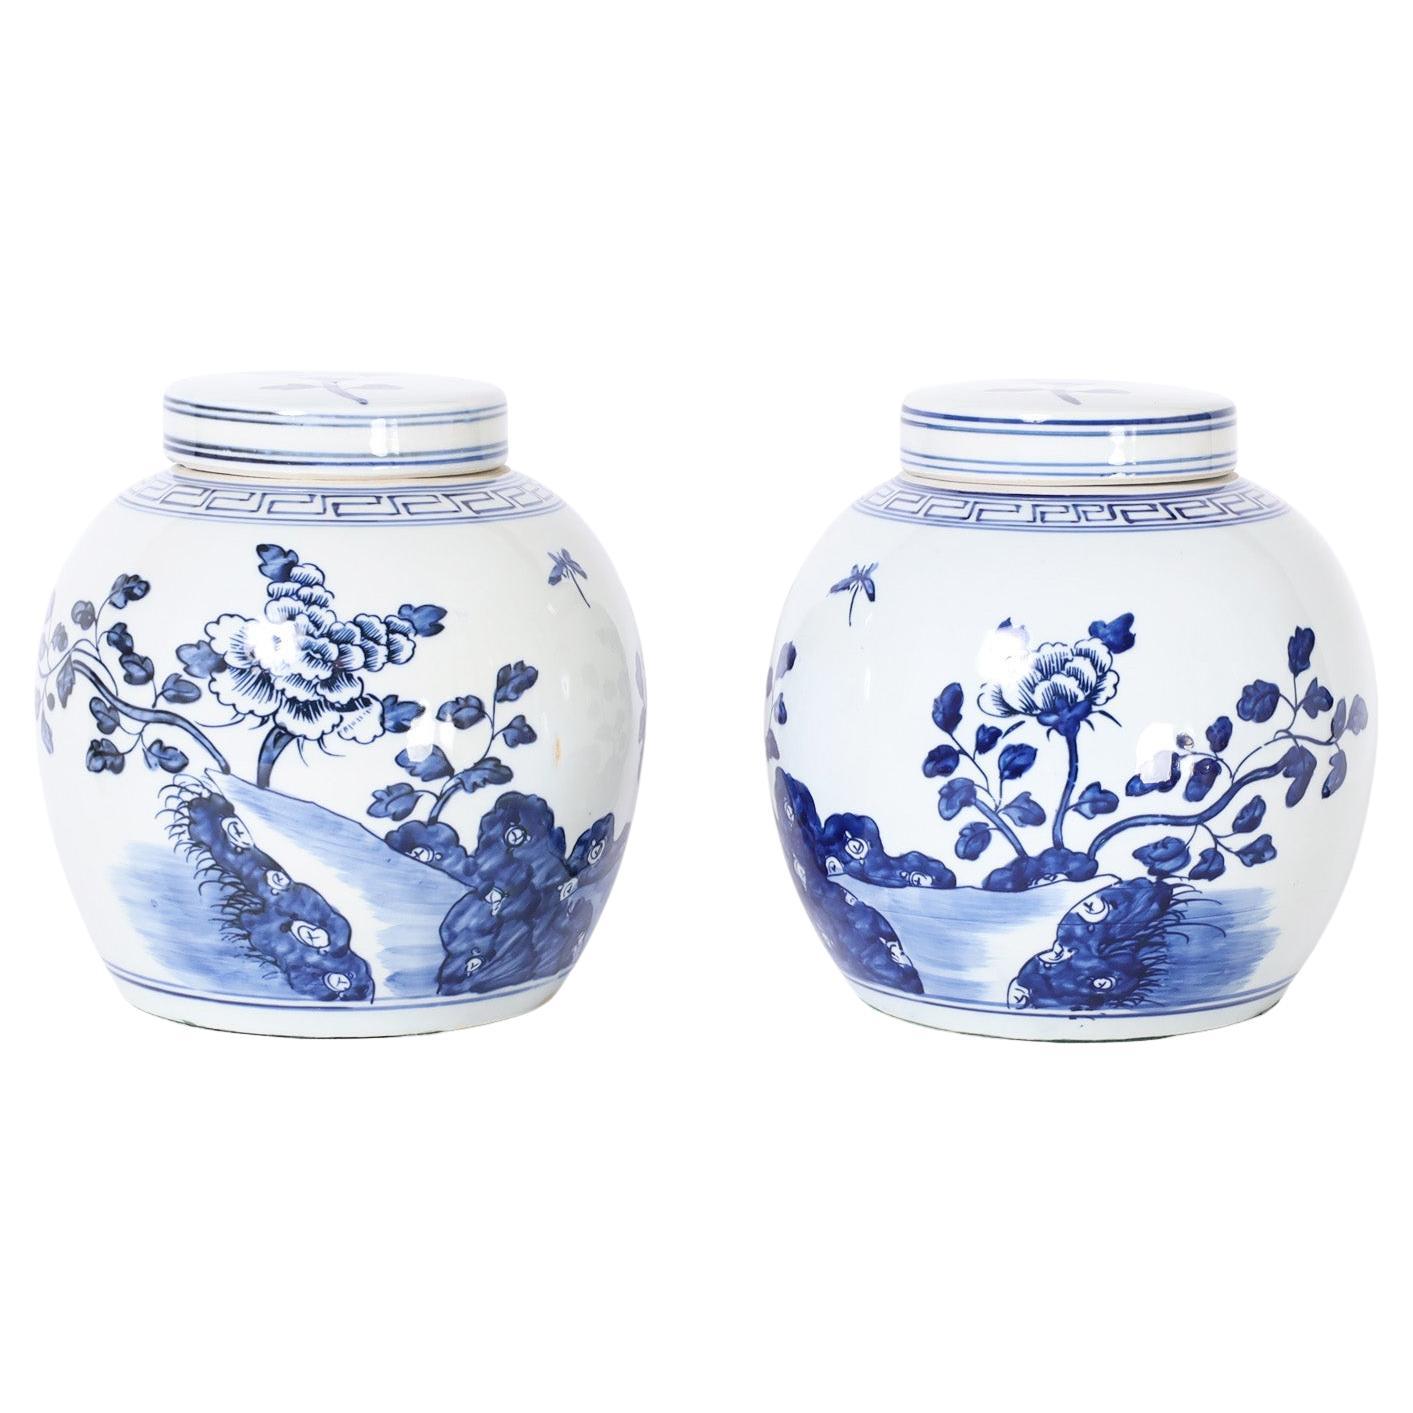 Pair of Blue and White Porcelain Lidded Jars with Flowers